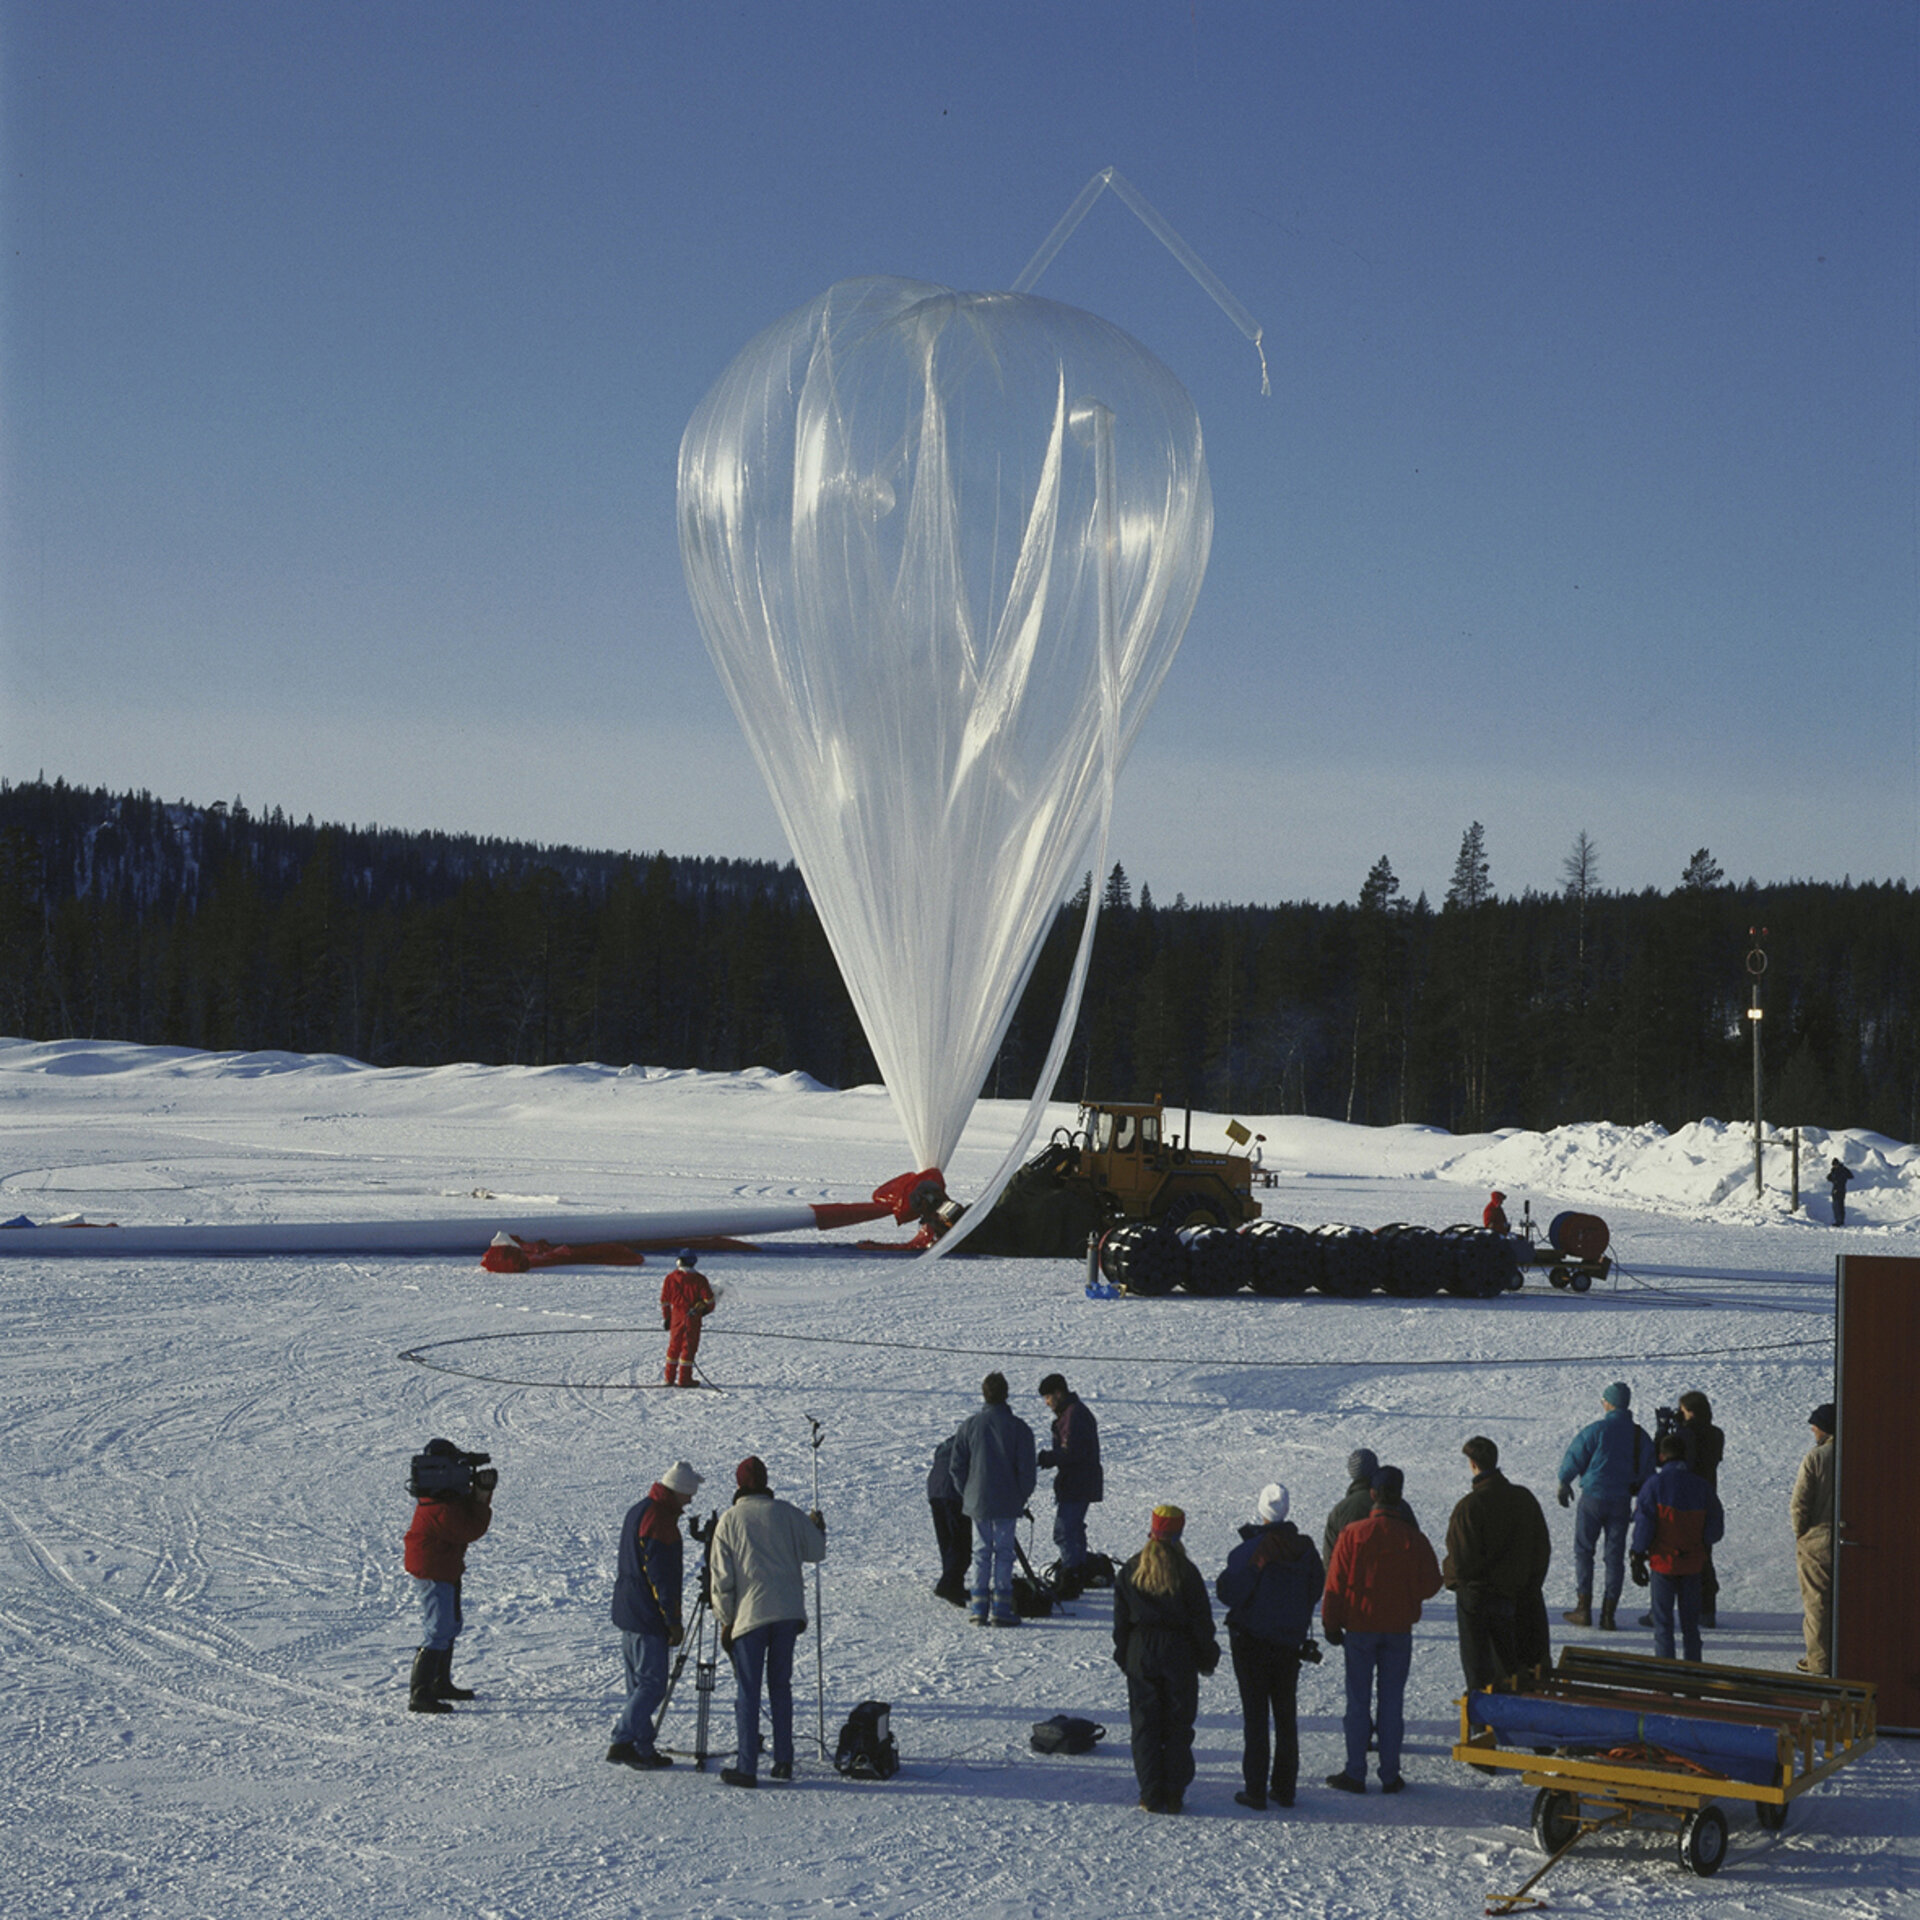 A BEXUS balloon is inflated prior to flight